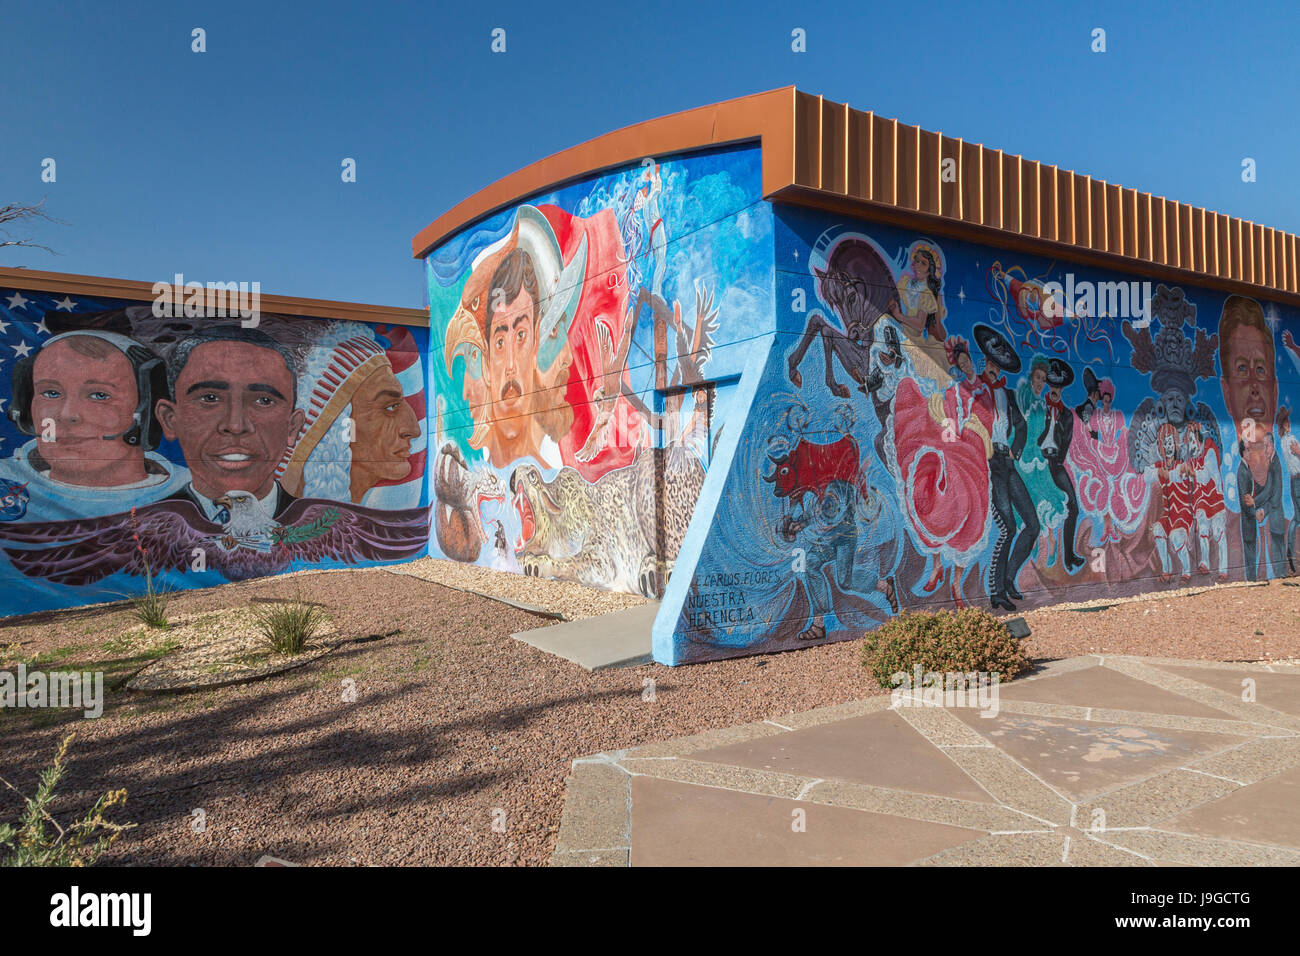 El Paso, Texas - Nuestra Herencia (Our Heritage), a painting at the Chamizal National Memorial Cultural Center by Carlos Flores. Stock Photo